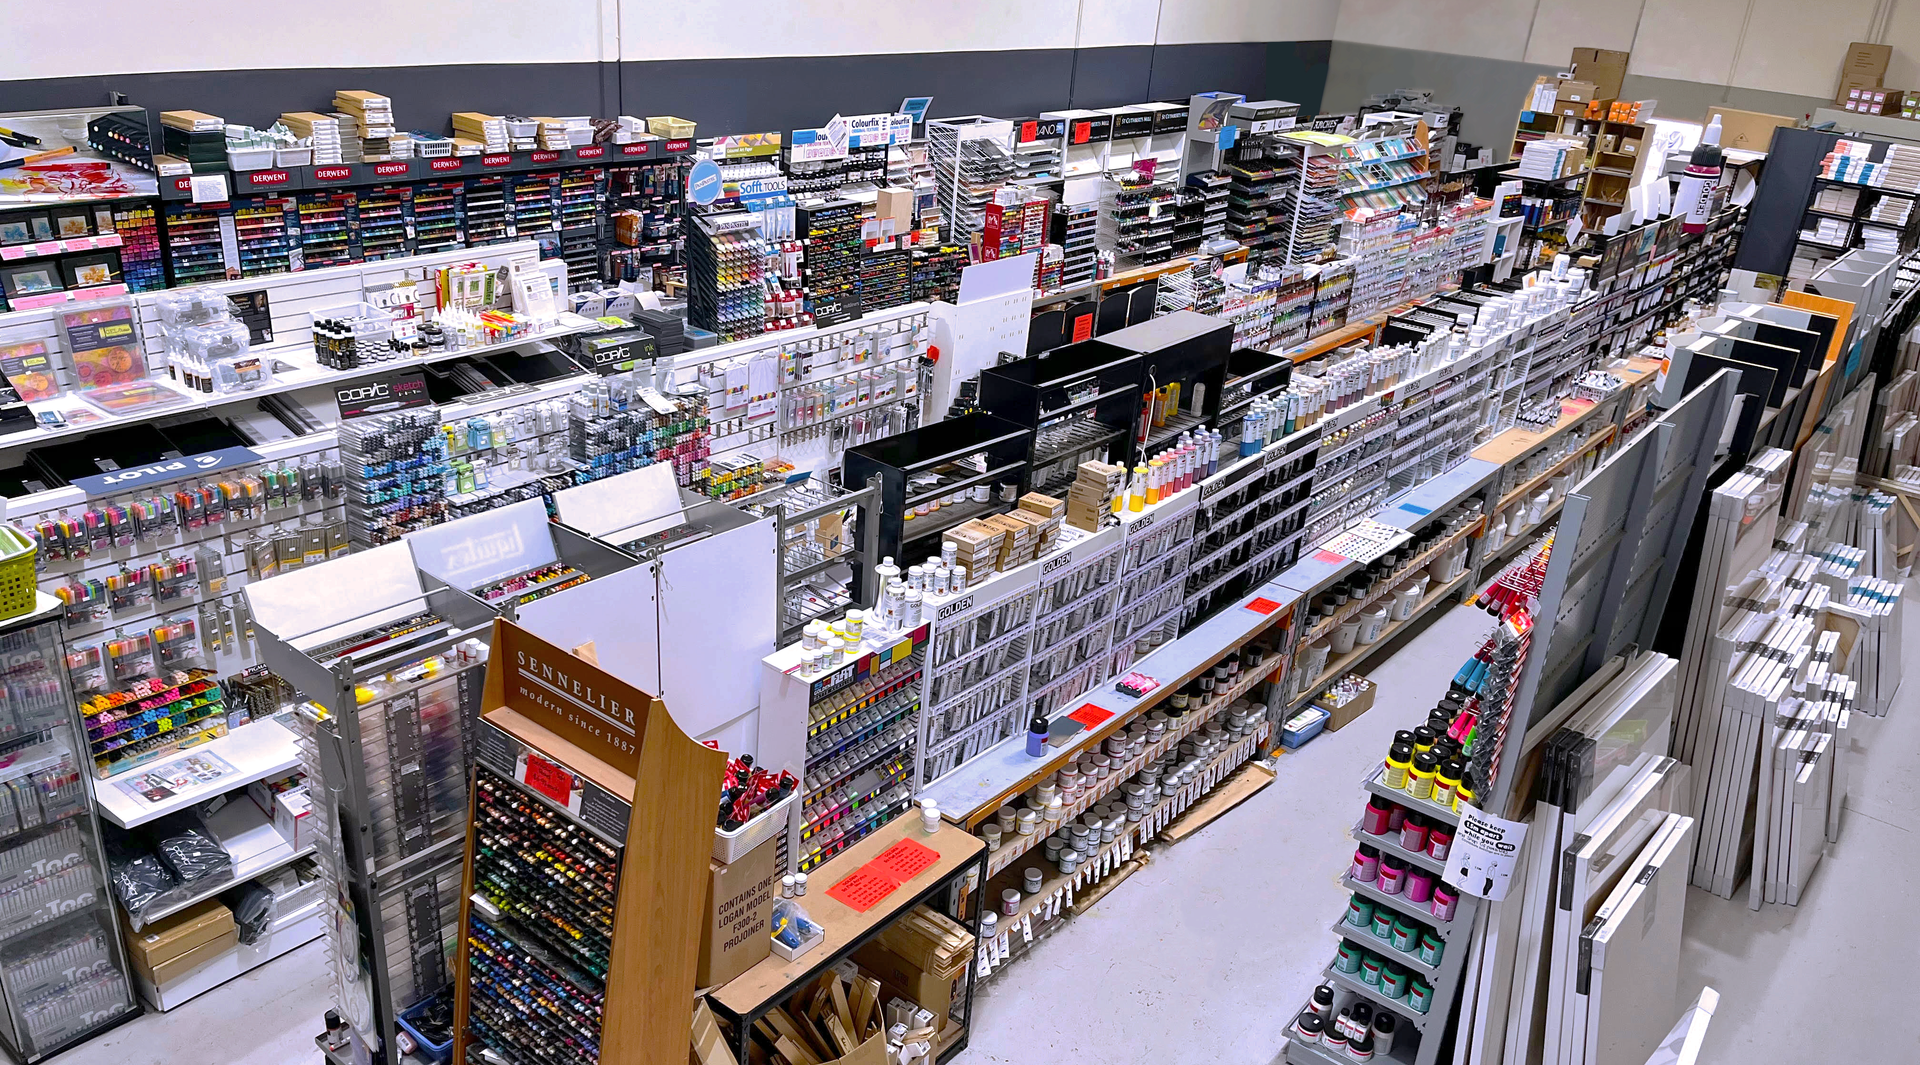 A birds eye view of The Art Shop floor, many stacked shelves in close aisles, all covered in art supplies like paint, brushes, mediums, markers, copics, pastels, canvas and more